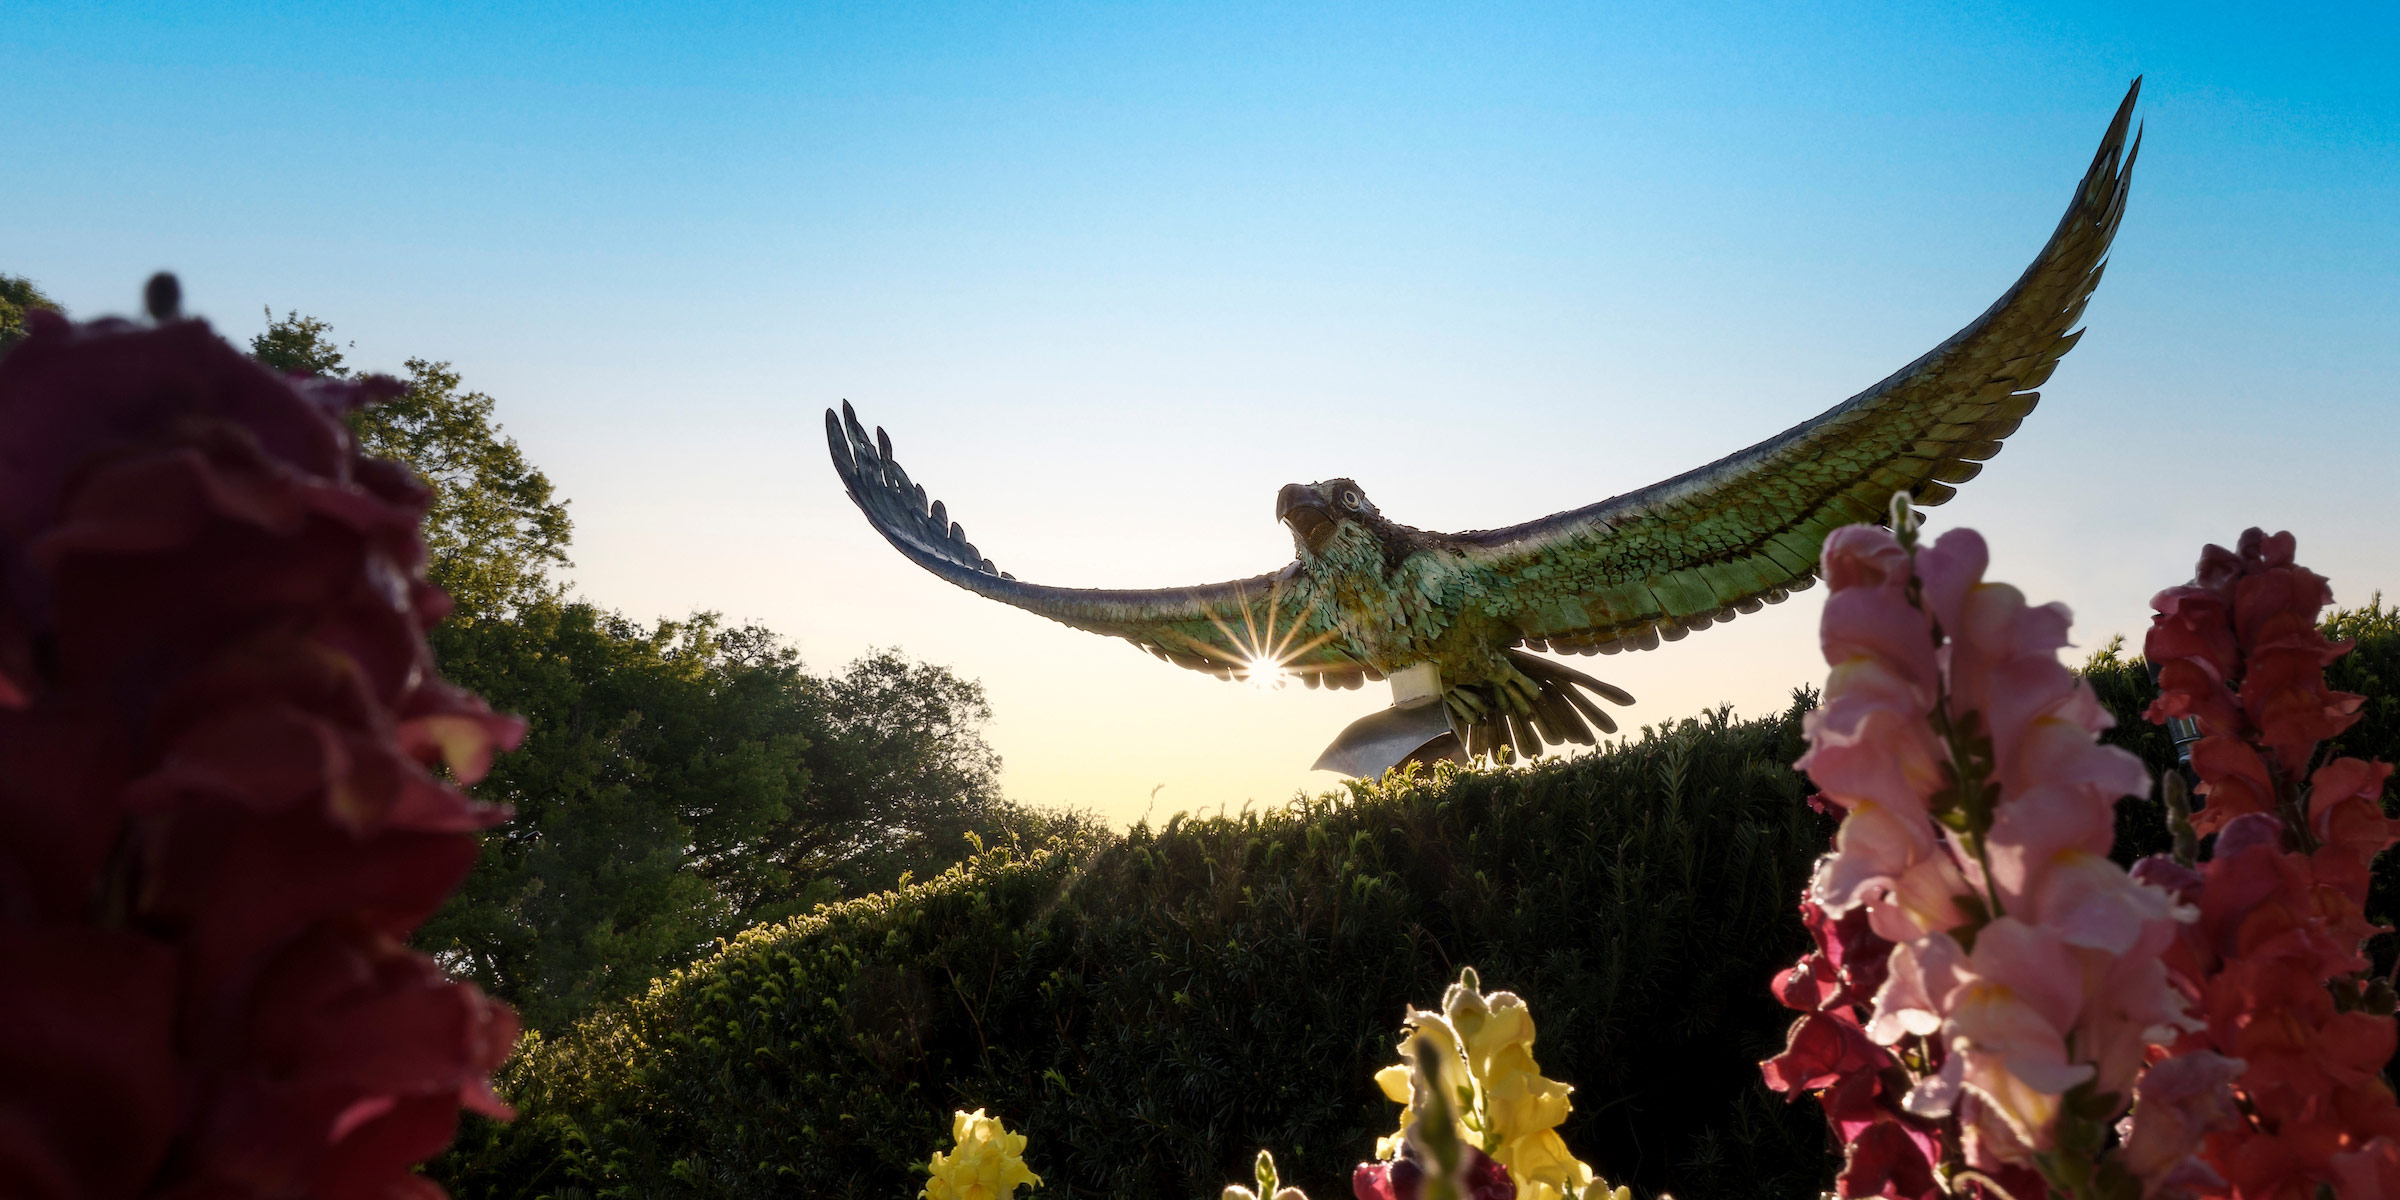 seahawk statue surrounded by spring flowers